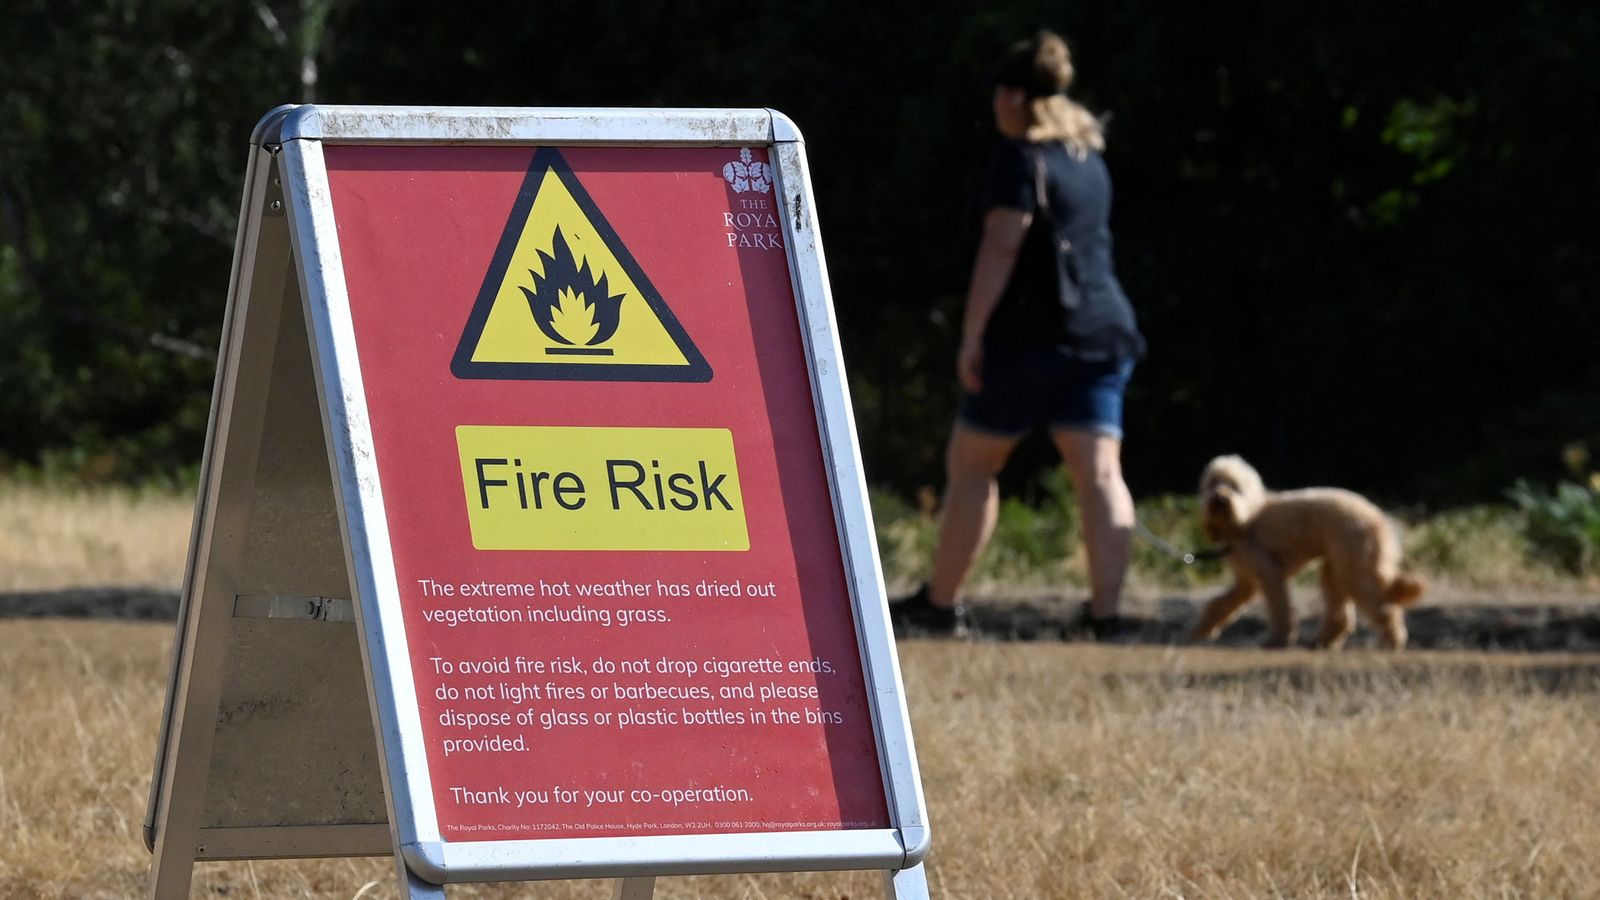 England 'not ready' to respond to extreme heatwaves this summer - and resources are at 'breaking point'